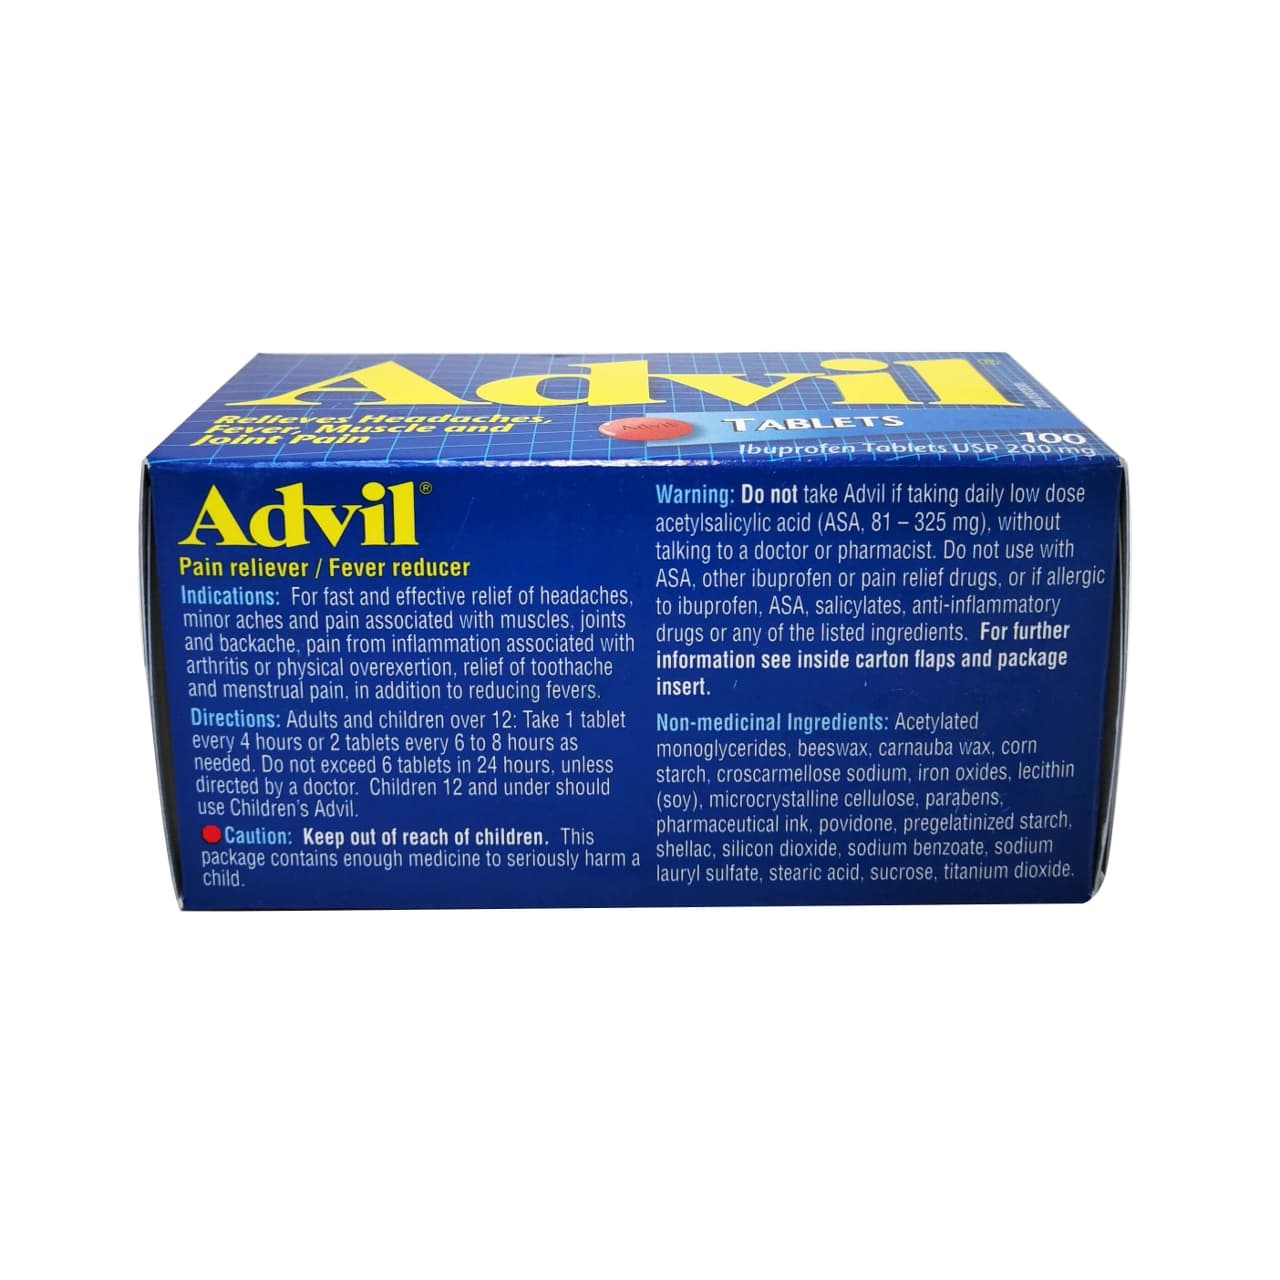 Product details, indications, directions, and warnings for Advil Ibuprofen 200mg Tablets 100 pack in English